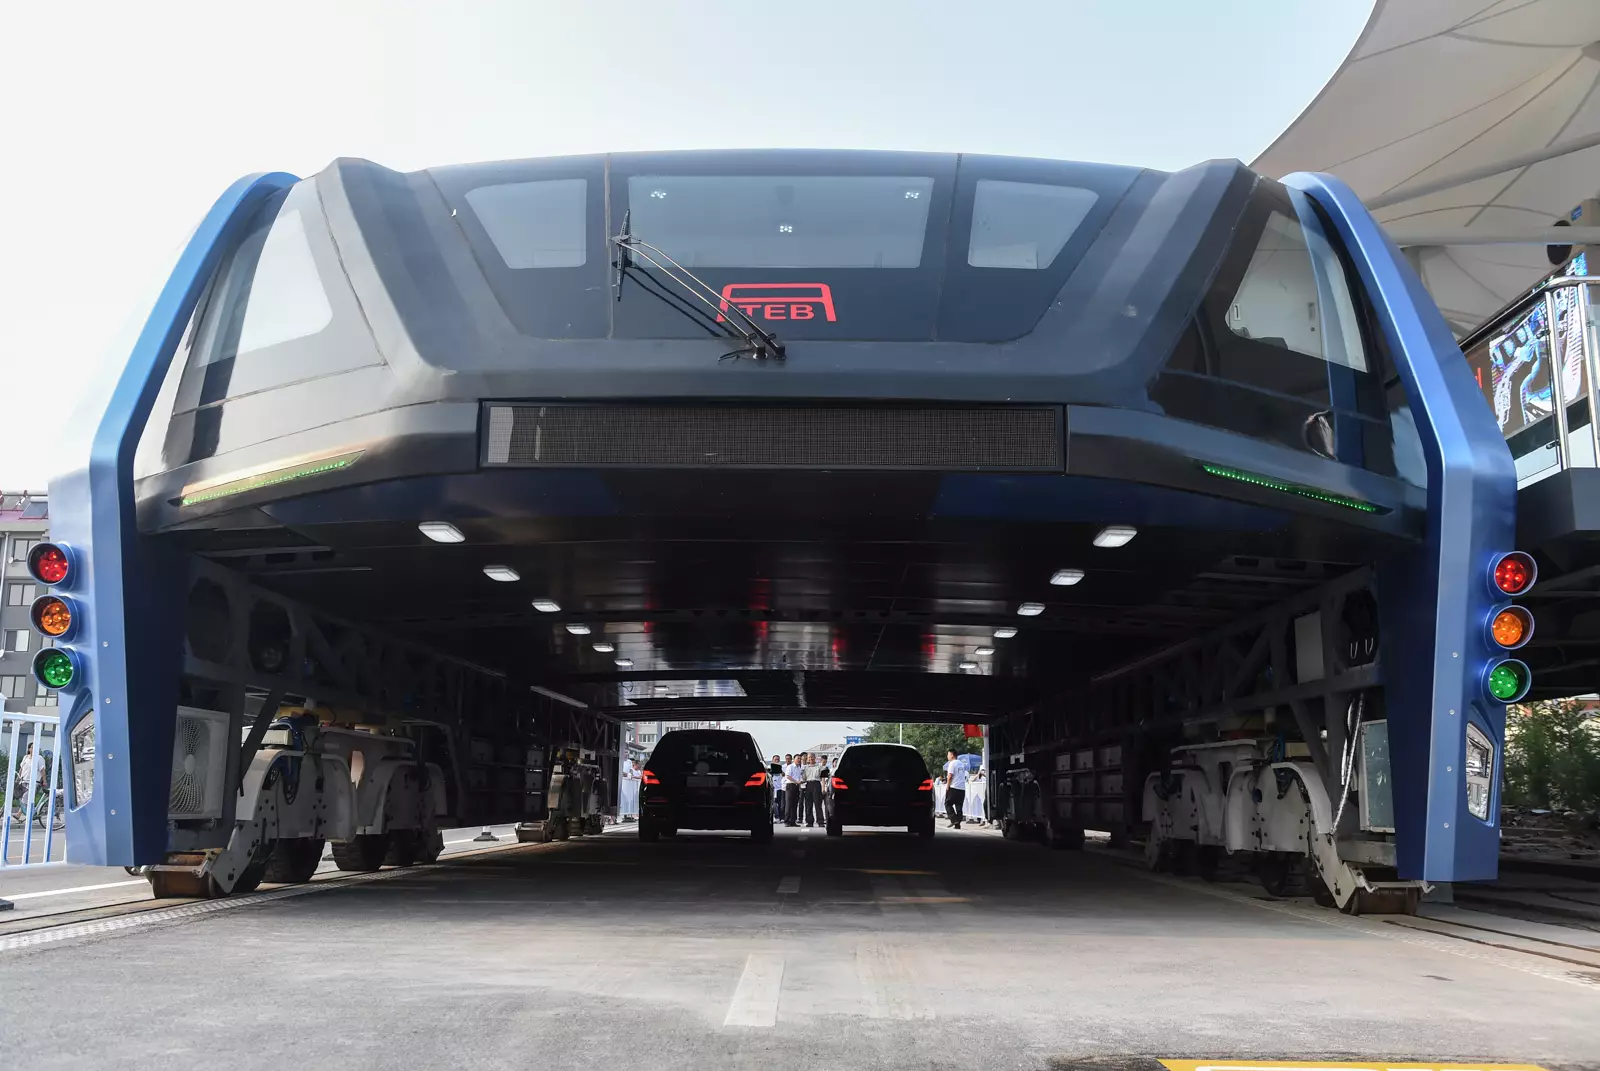 China’s Elevated Bus That Travels Over The Top Of Traffic Takes Its First Test Drive